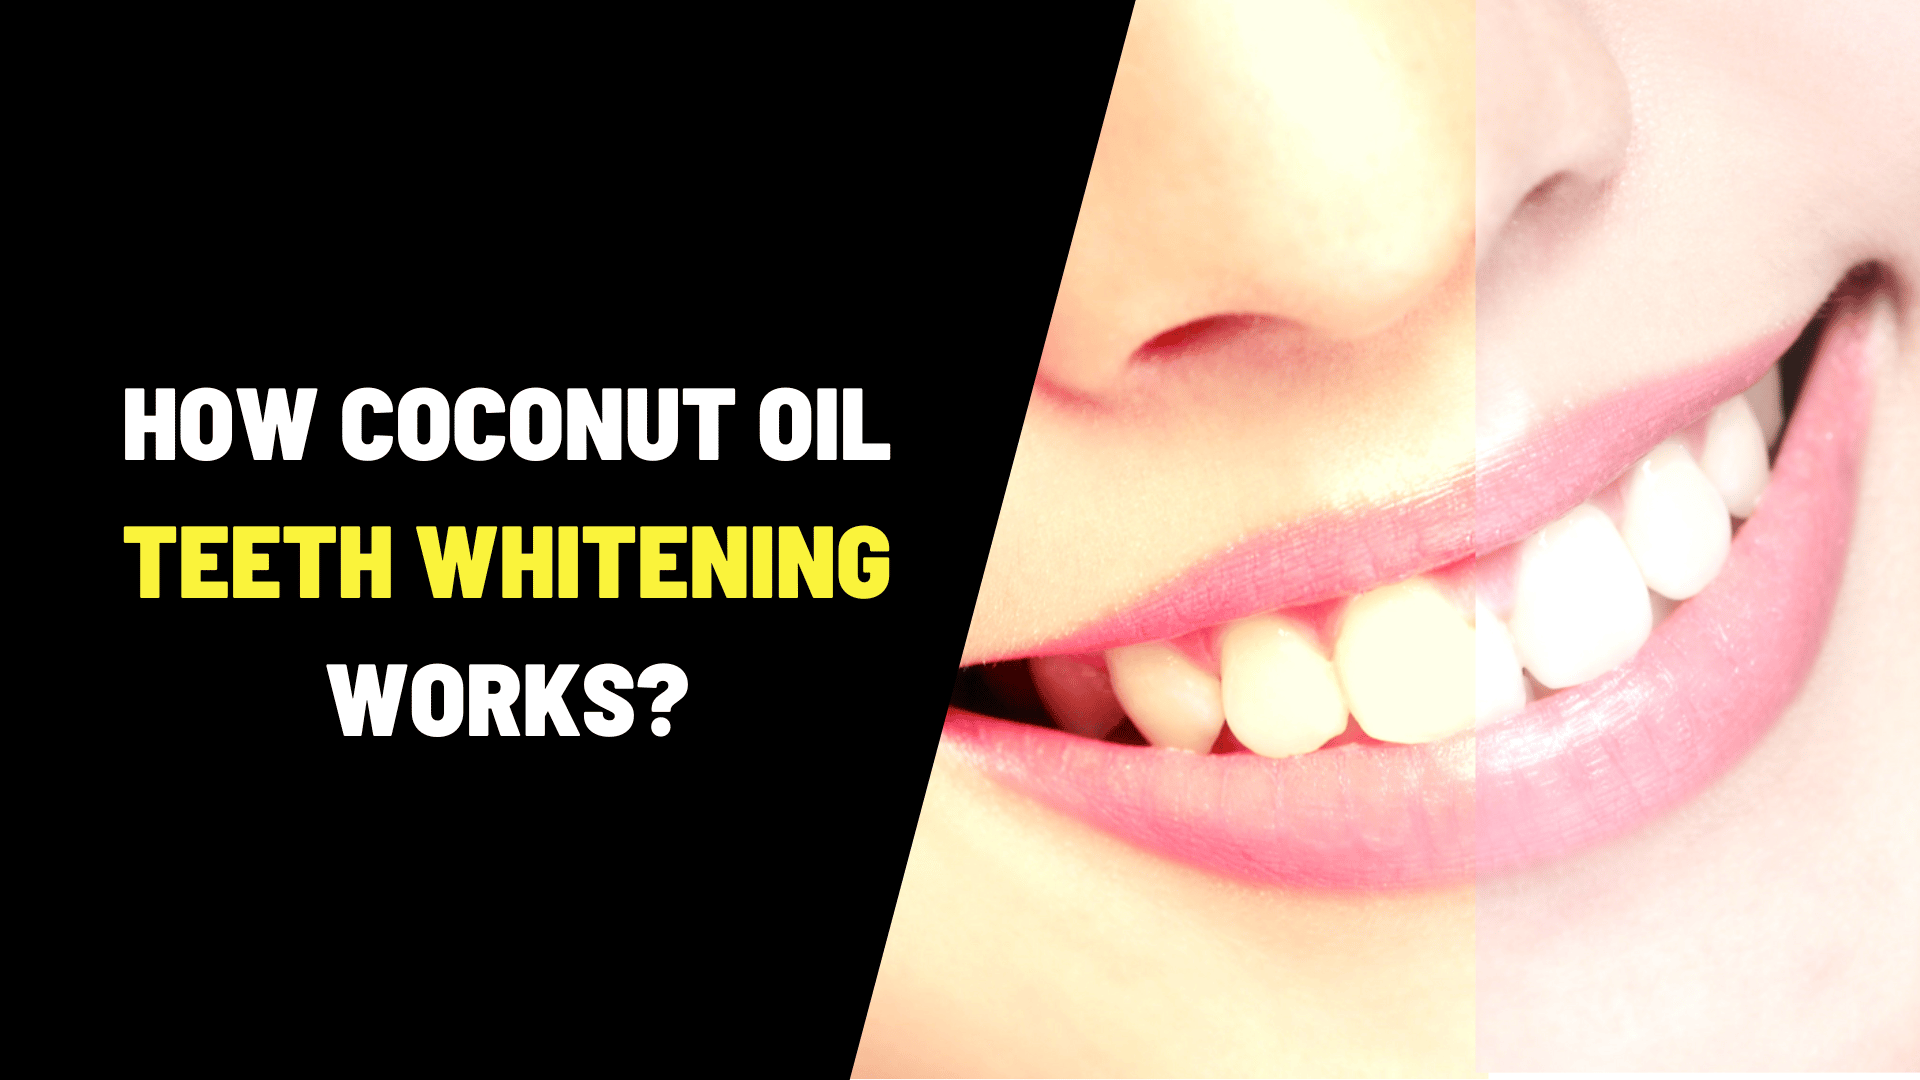 How Coconut Oil Teeth Whitening Works